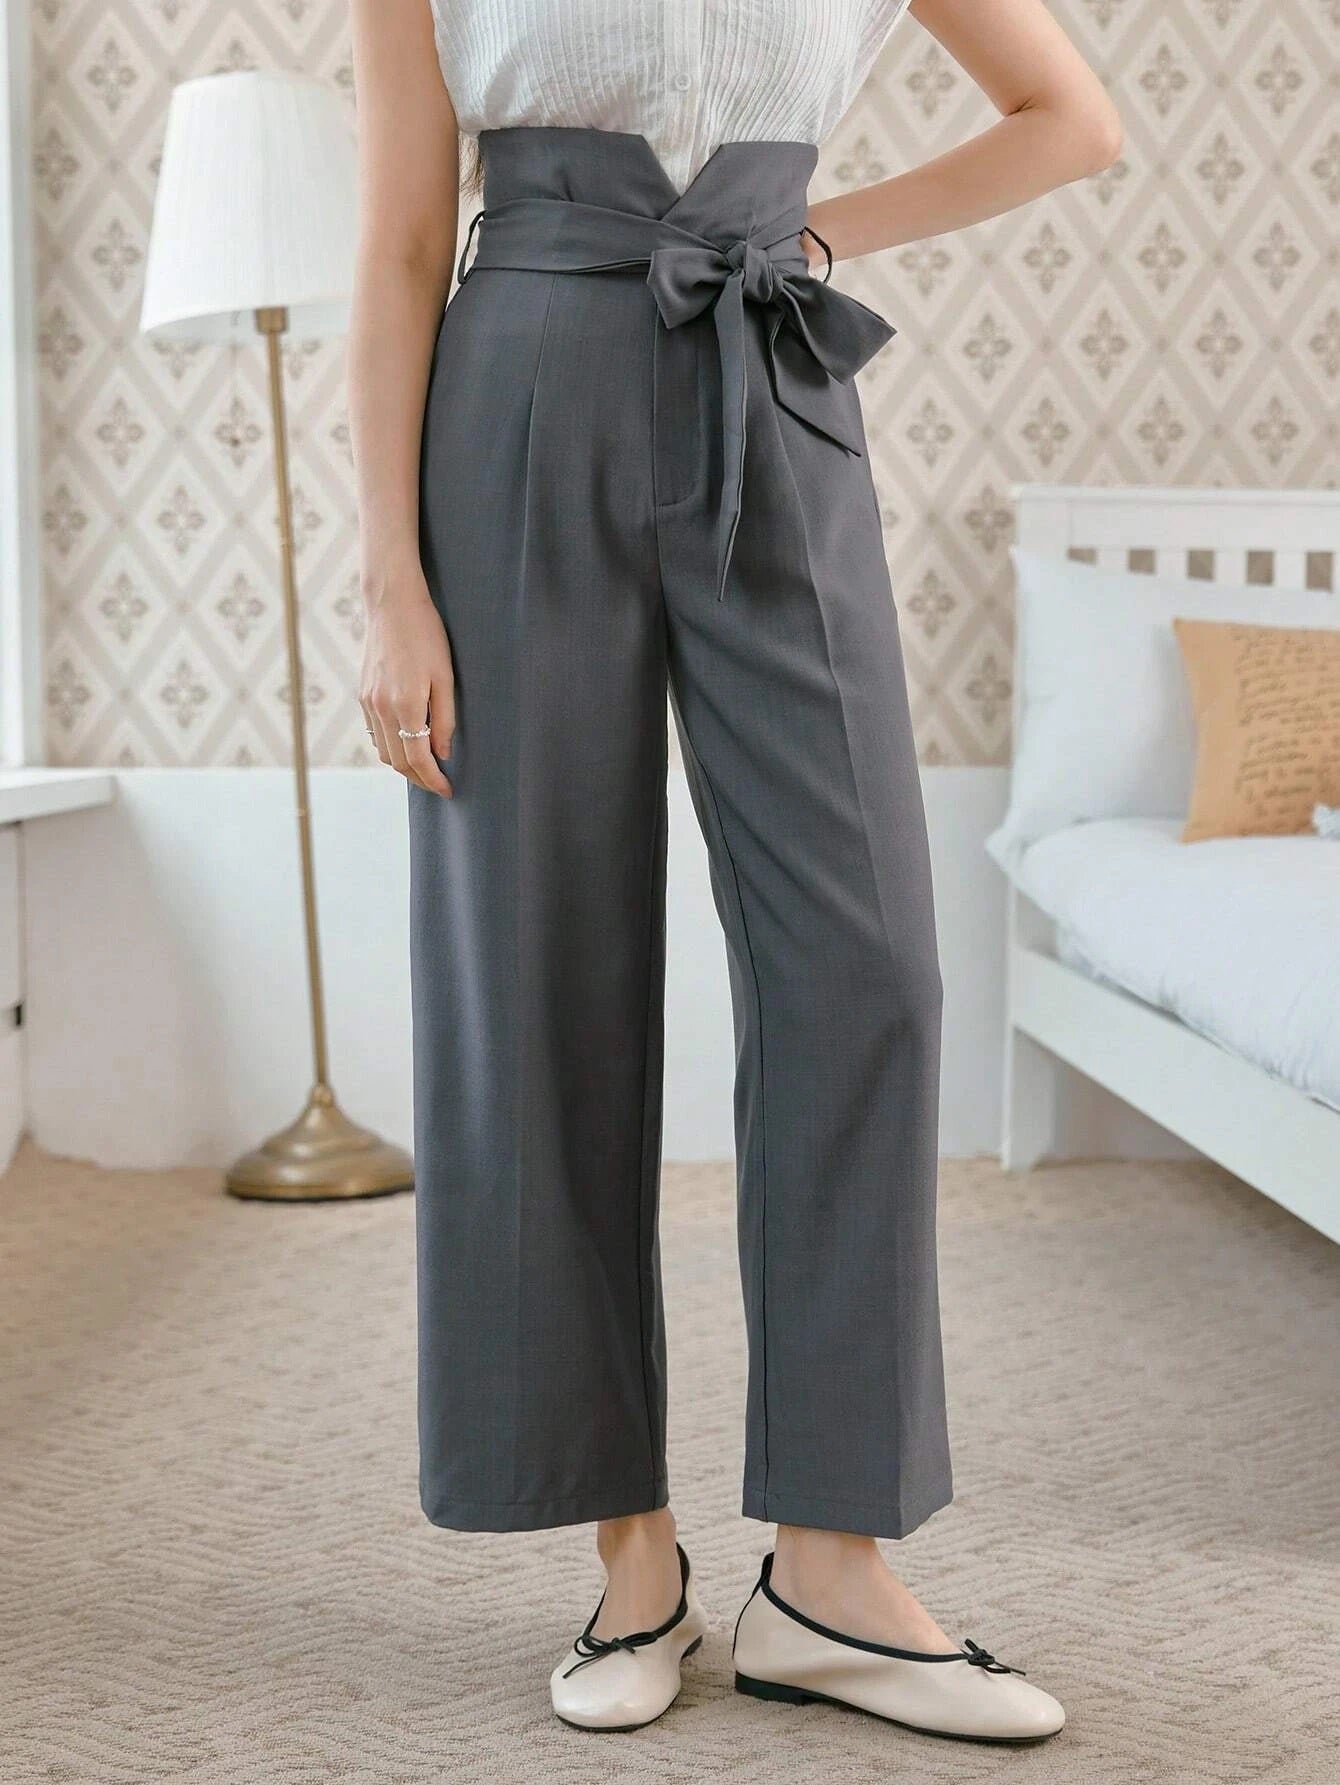 CM-BS646029 Women Casual Seoul Style High Waist Belted Wide Leg Pants - Gray